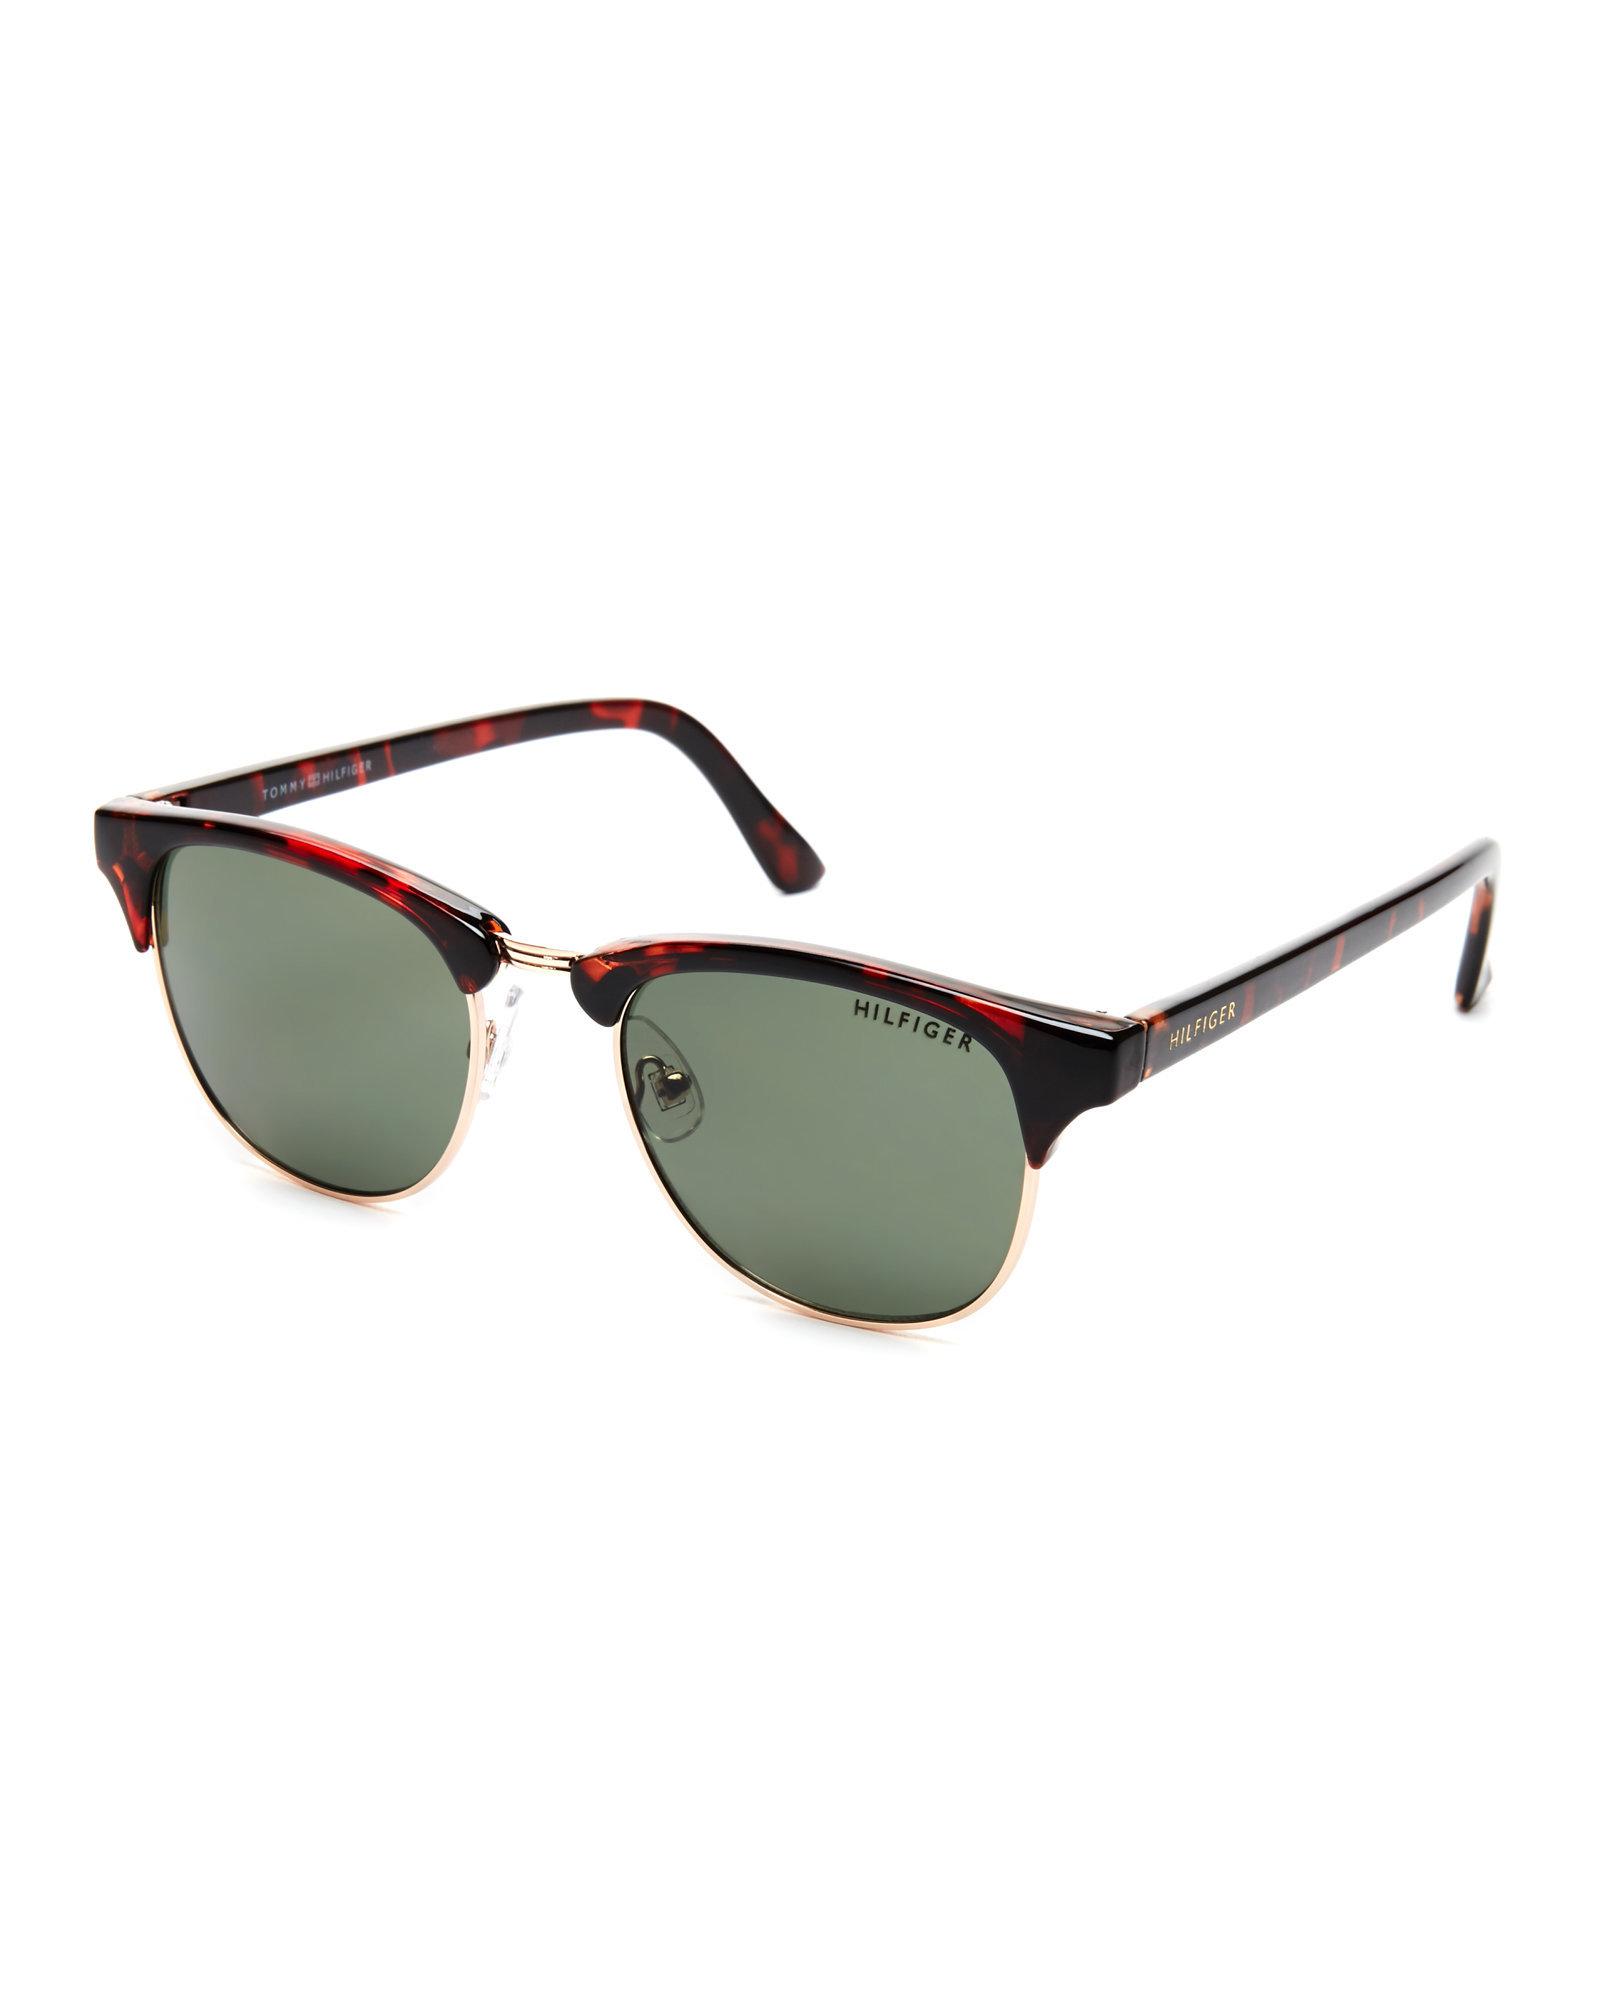 tommy hilfiger clubmaster sunglasses